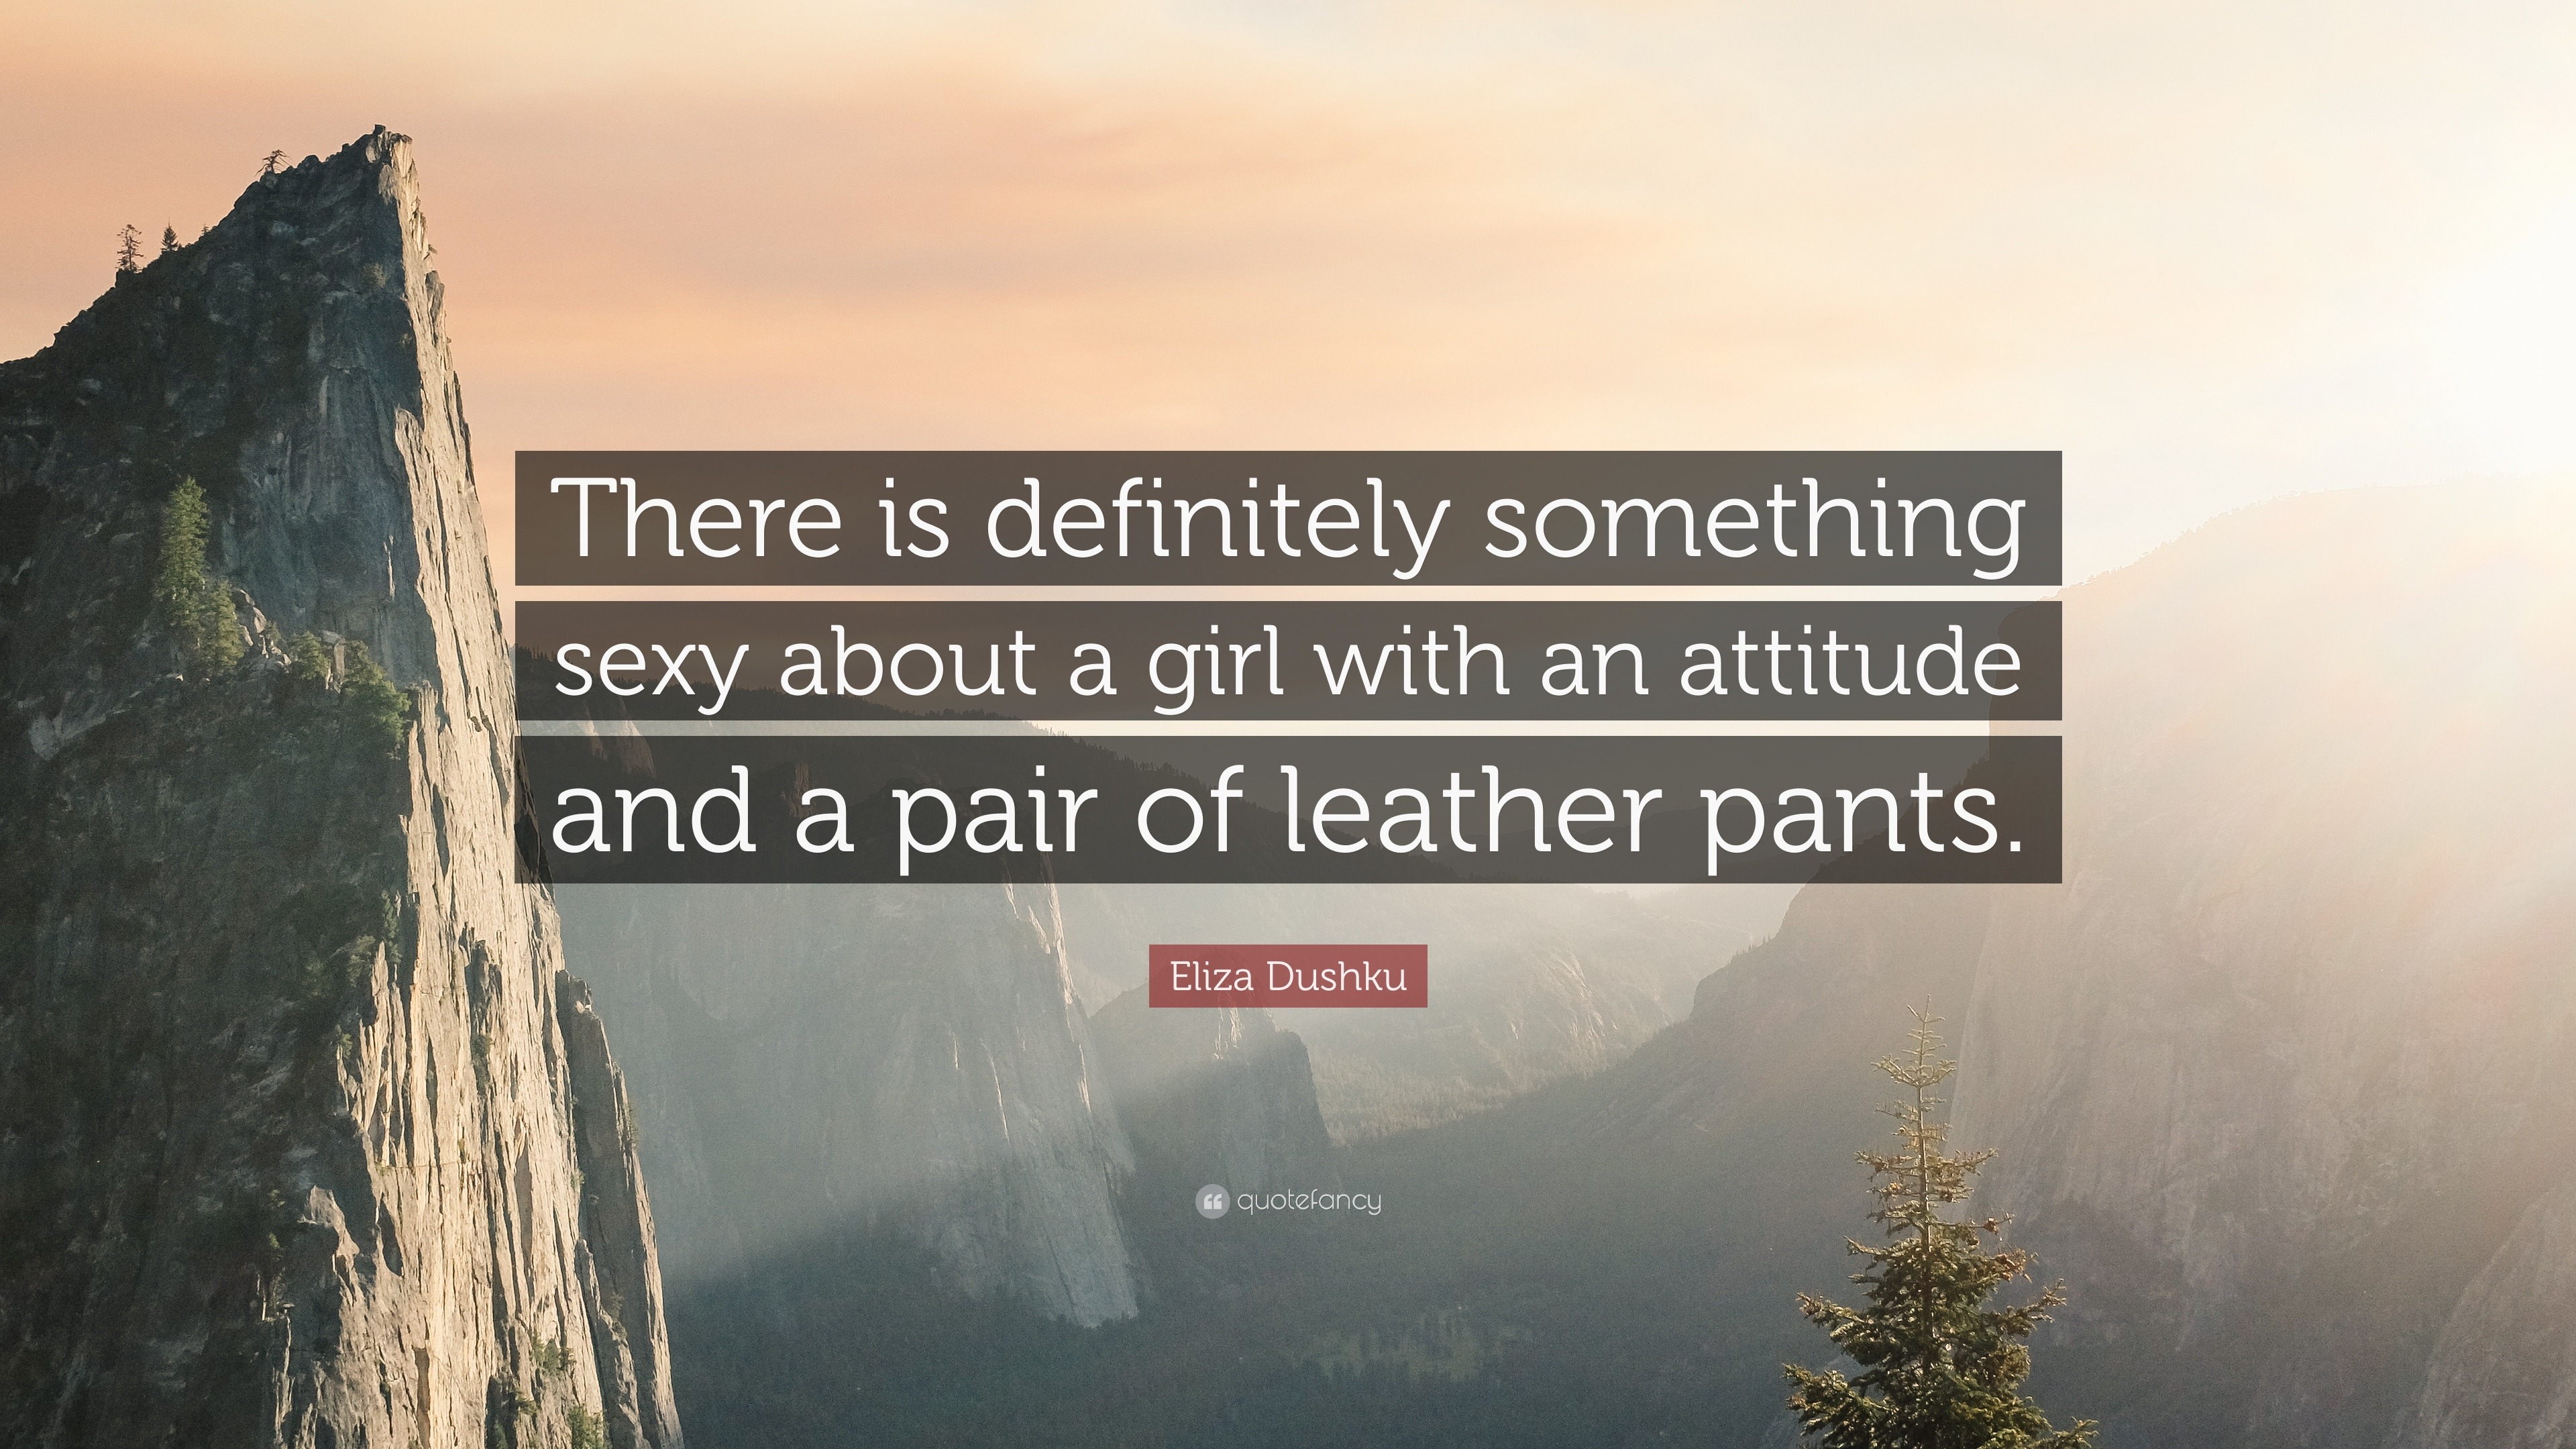 There is definitely something sexy about a girl with an attitude